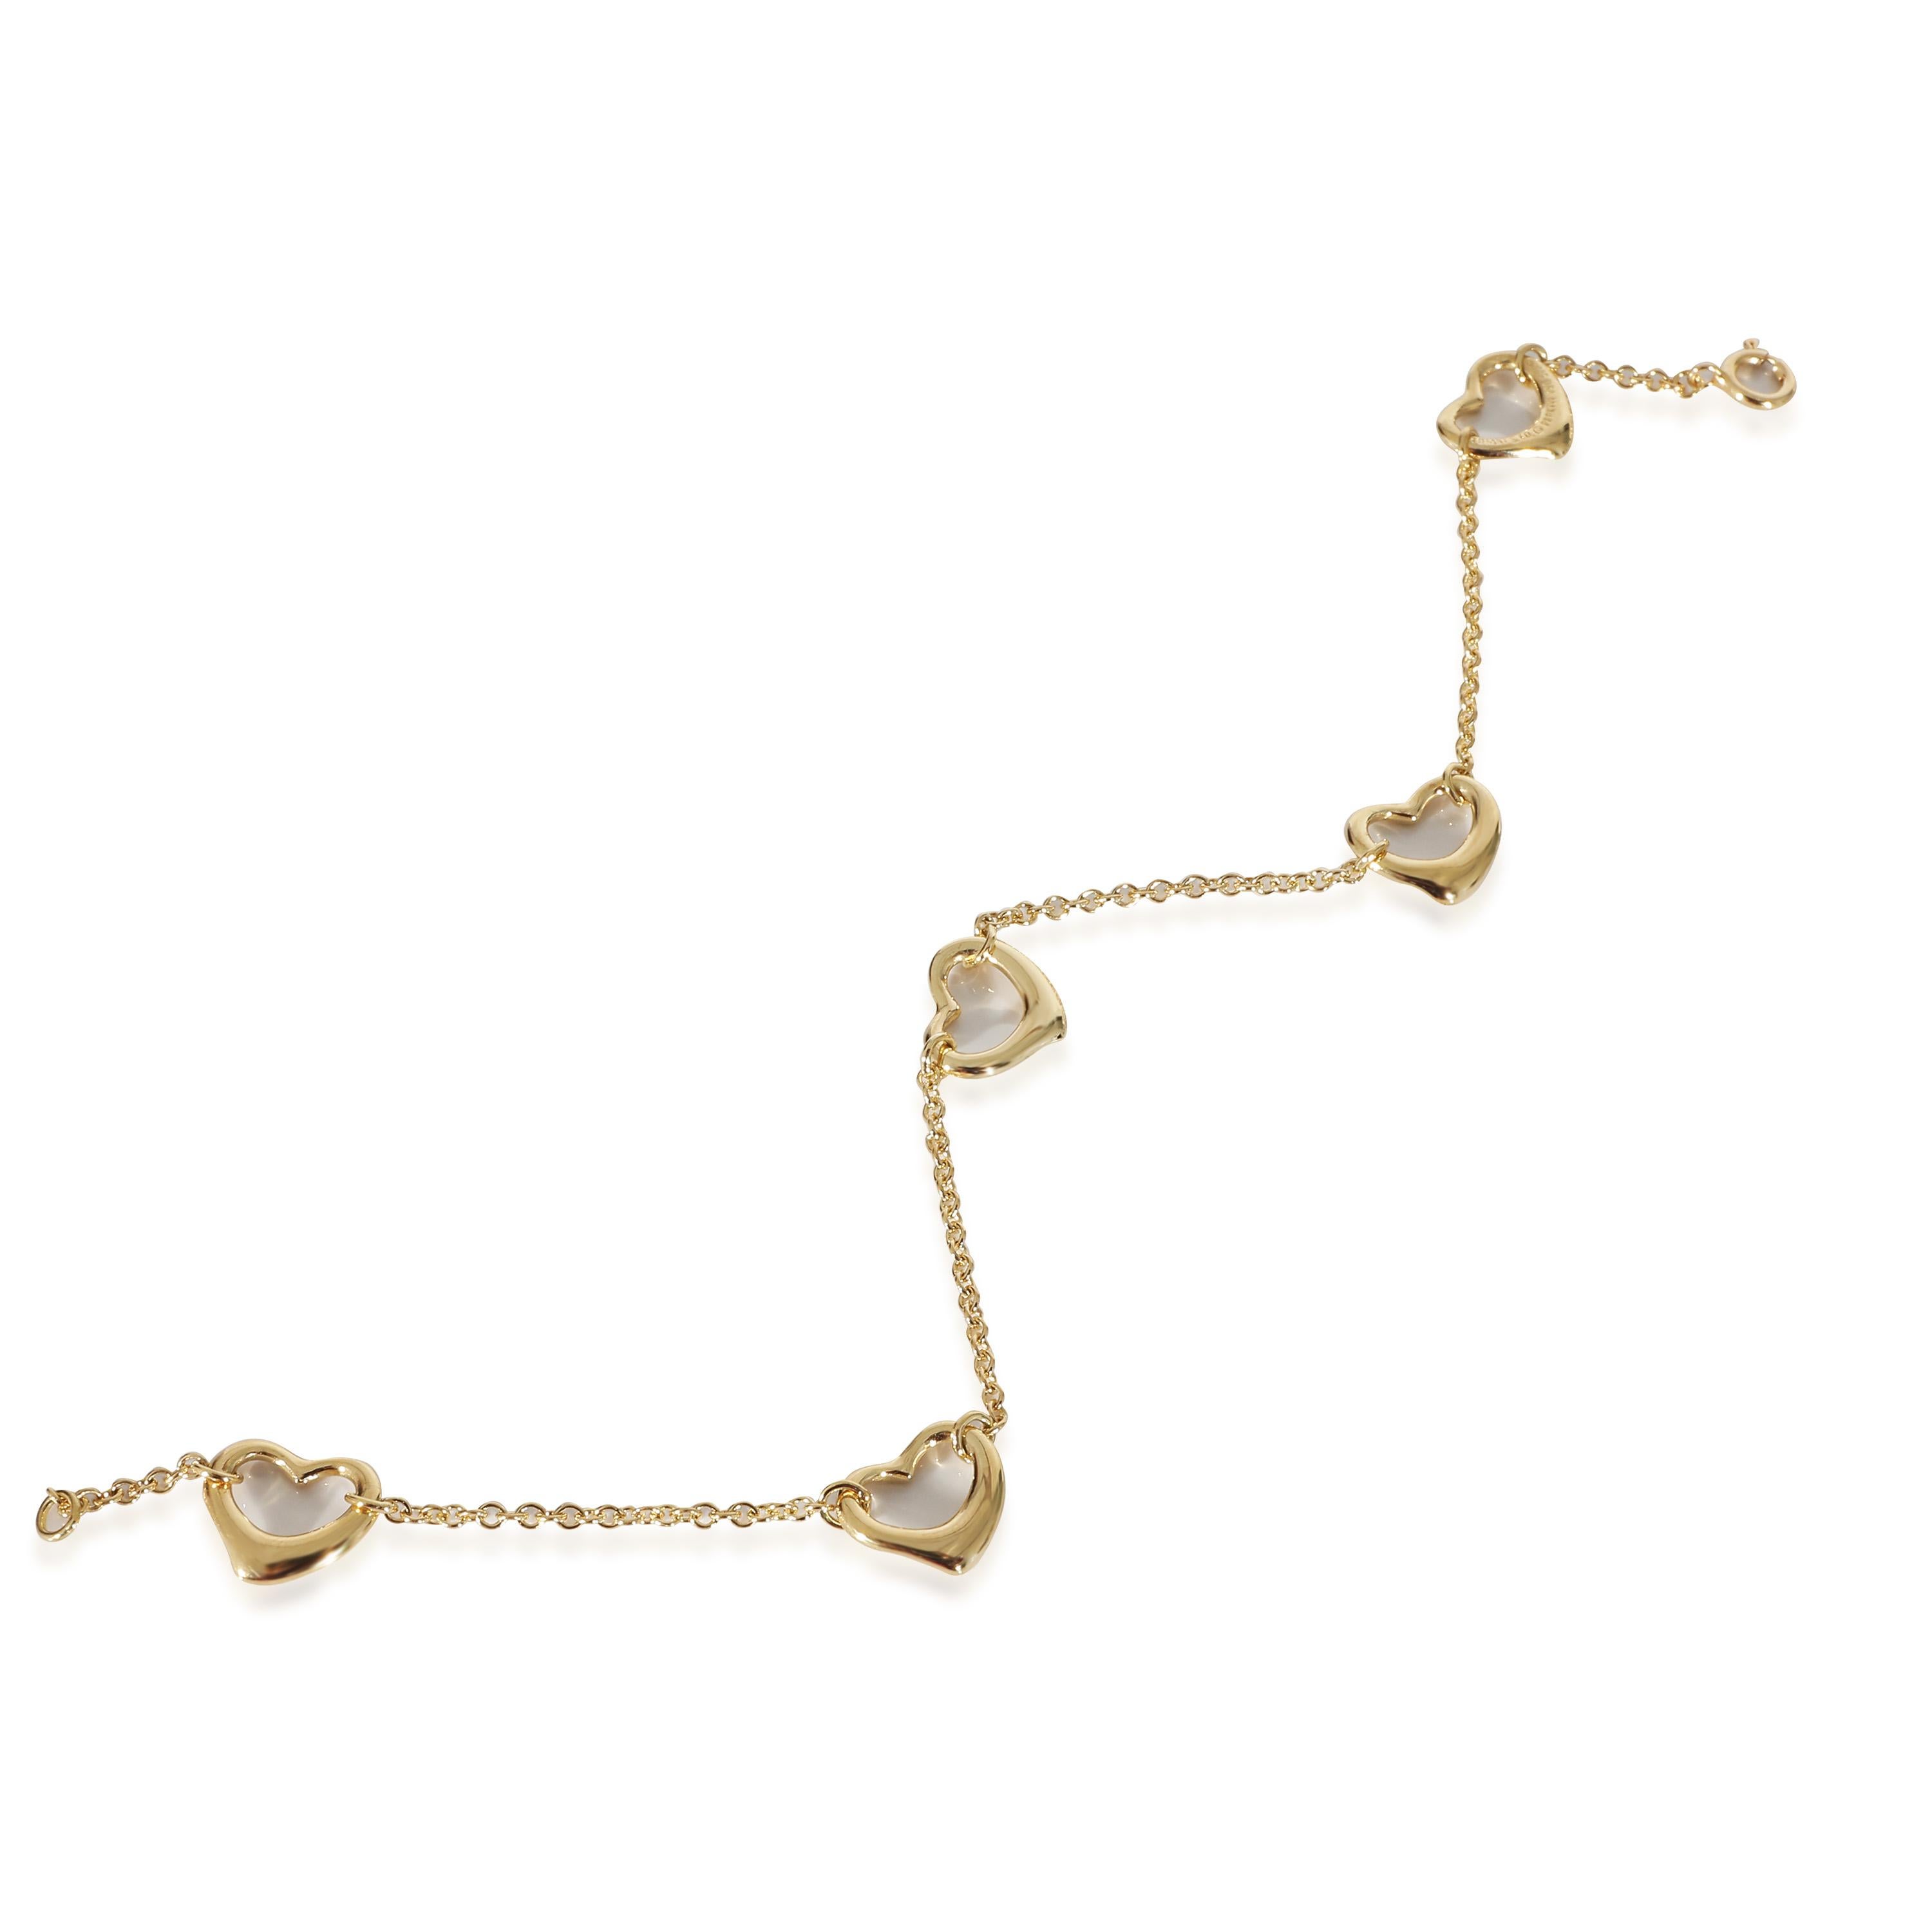 Tiffany & Co. Elsa Peretti Open Heart 5 Station Bracelet in 18K Yellow Gold In Excellent Condition For Sale In New York, NY